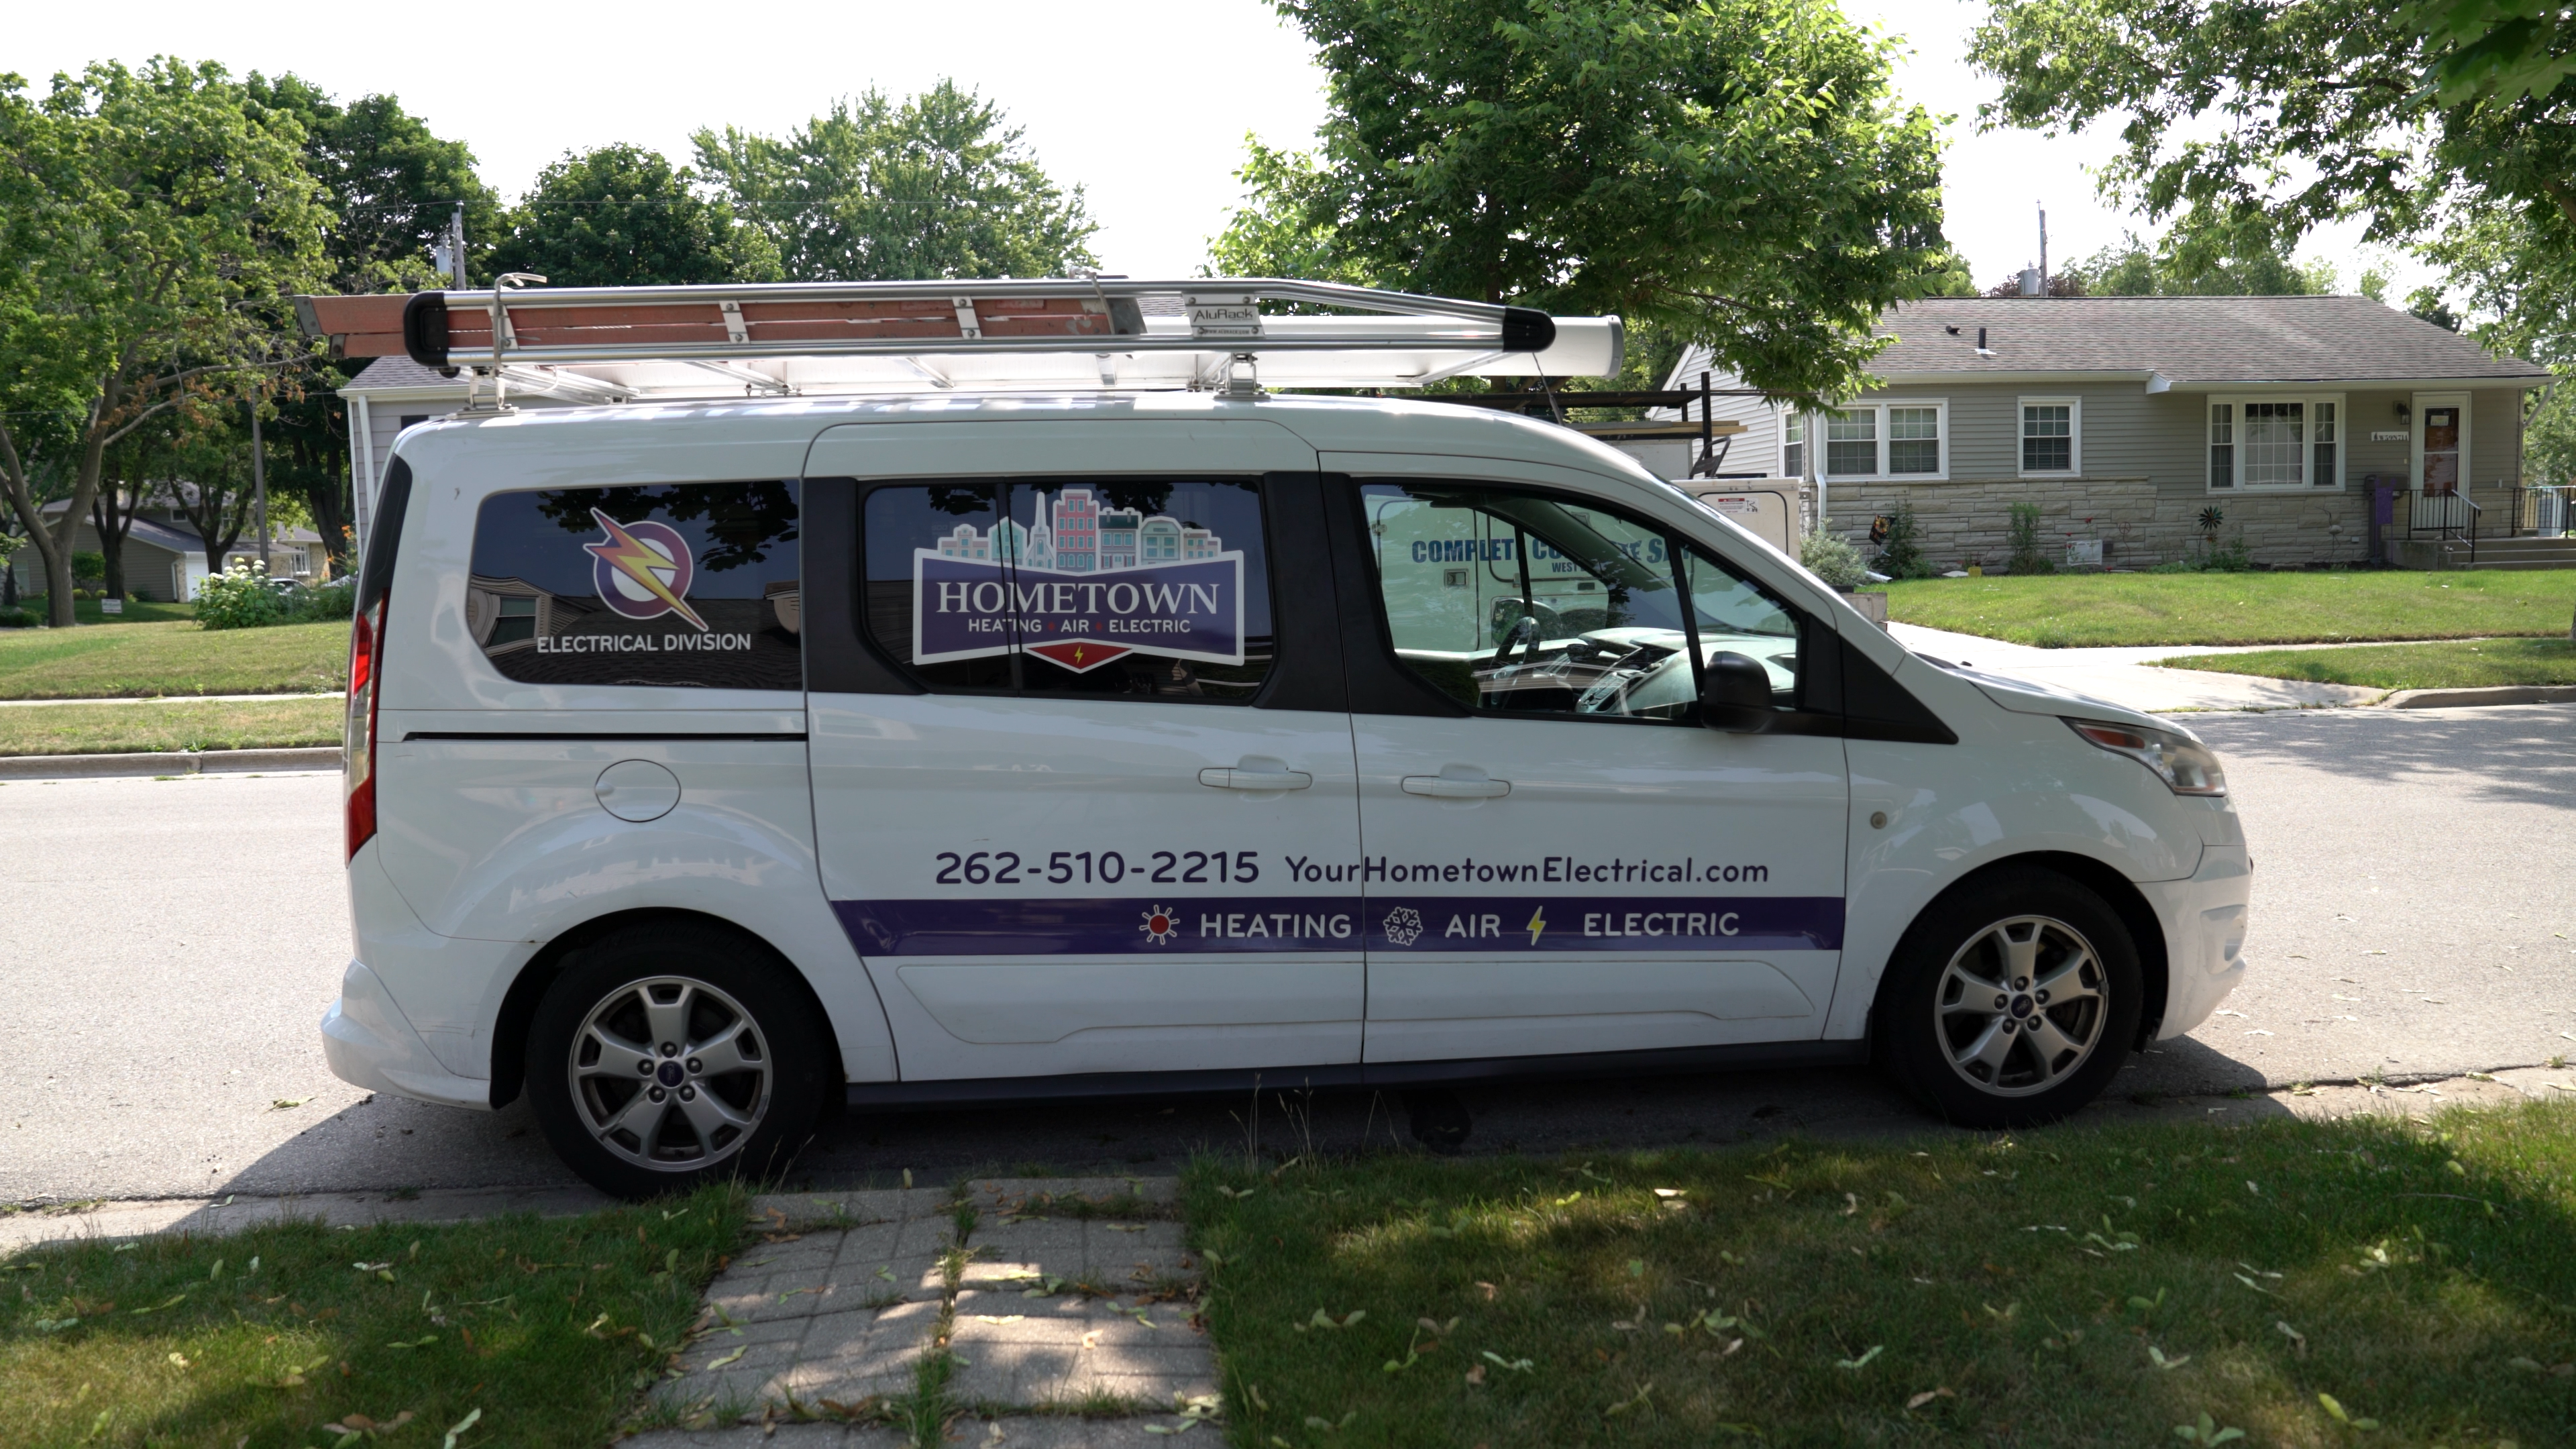 a Hometown Heating, Air & Electric HVAC van, representing how homeowners can protect their homes against carbon monoxide poisoning by regularly maintaining their HVAC system